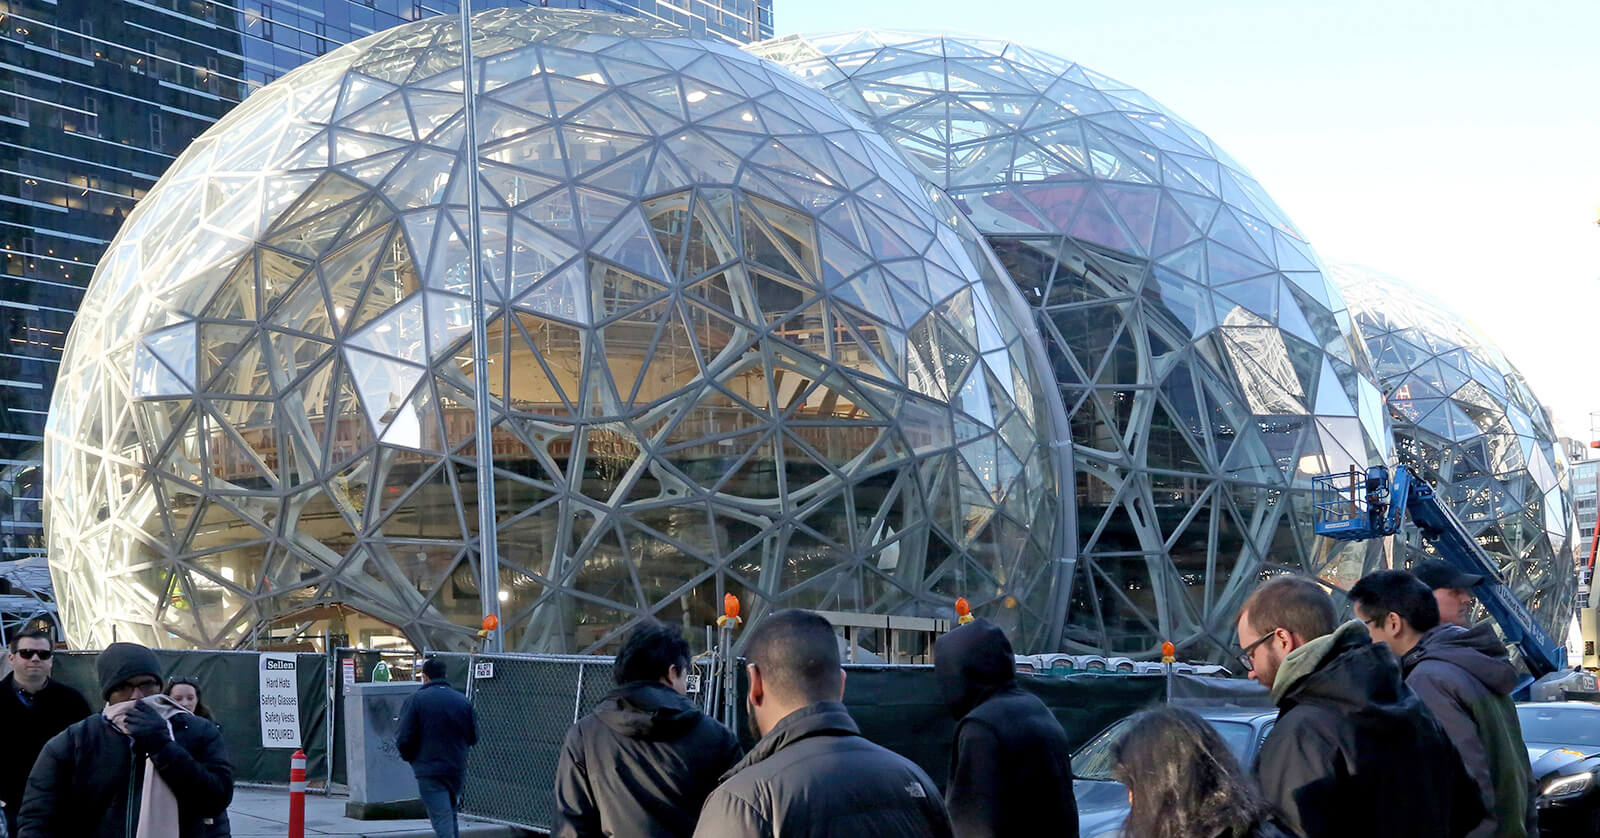 Amazon opens rainforest dome offices in Seattle